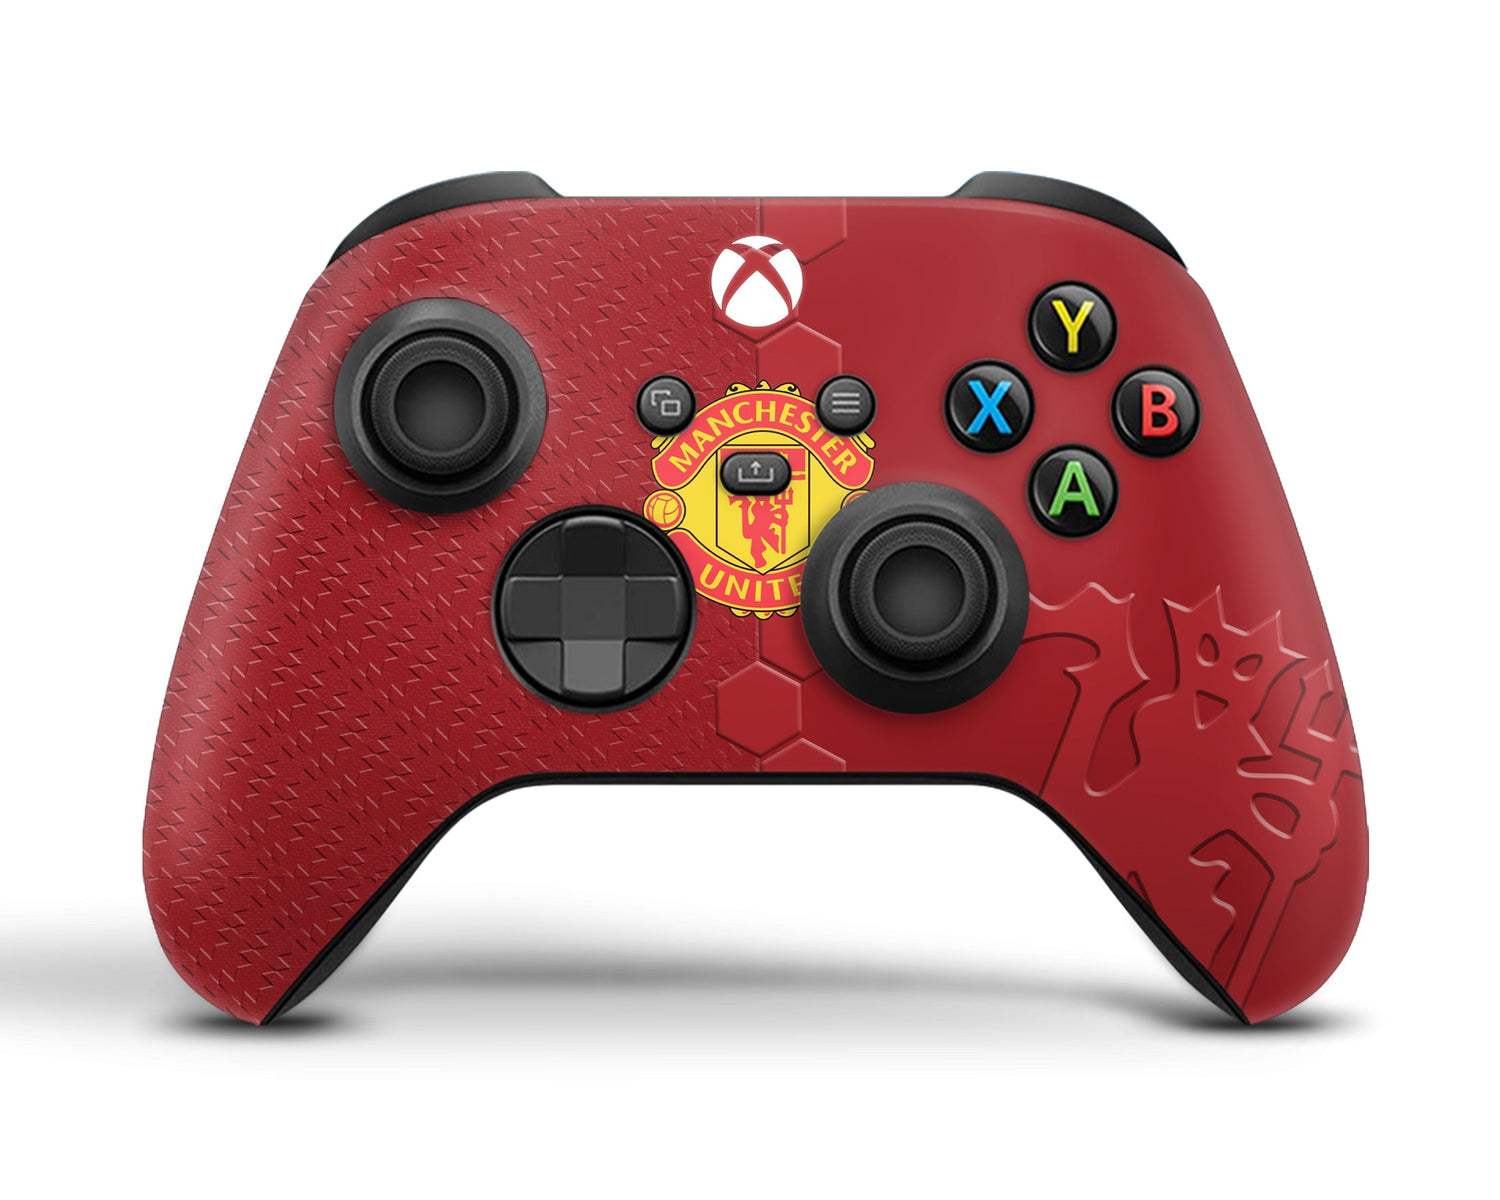 Lux Skins Xbox Series X Manchester United FC Xbox Series X Skins - Sports Soccer & S Skin